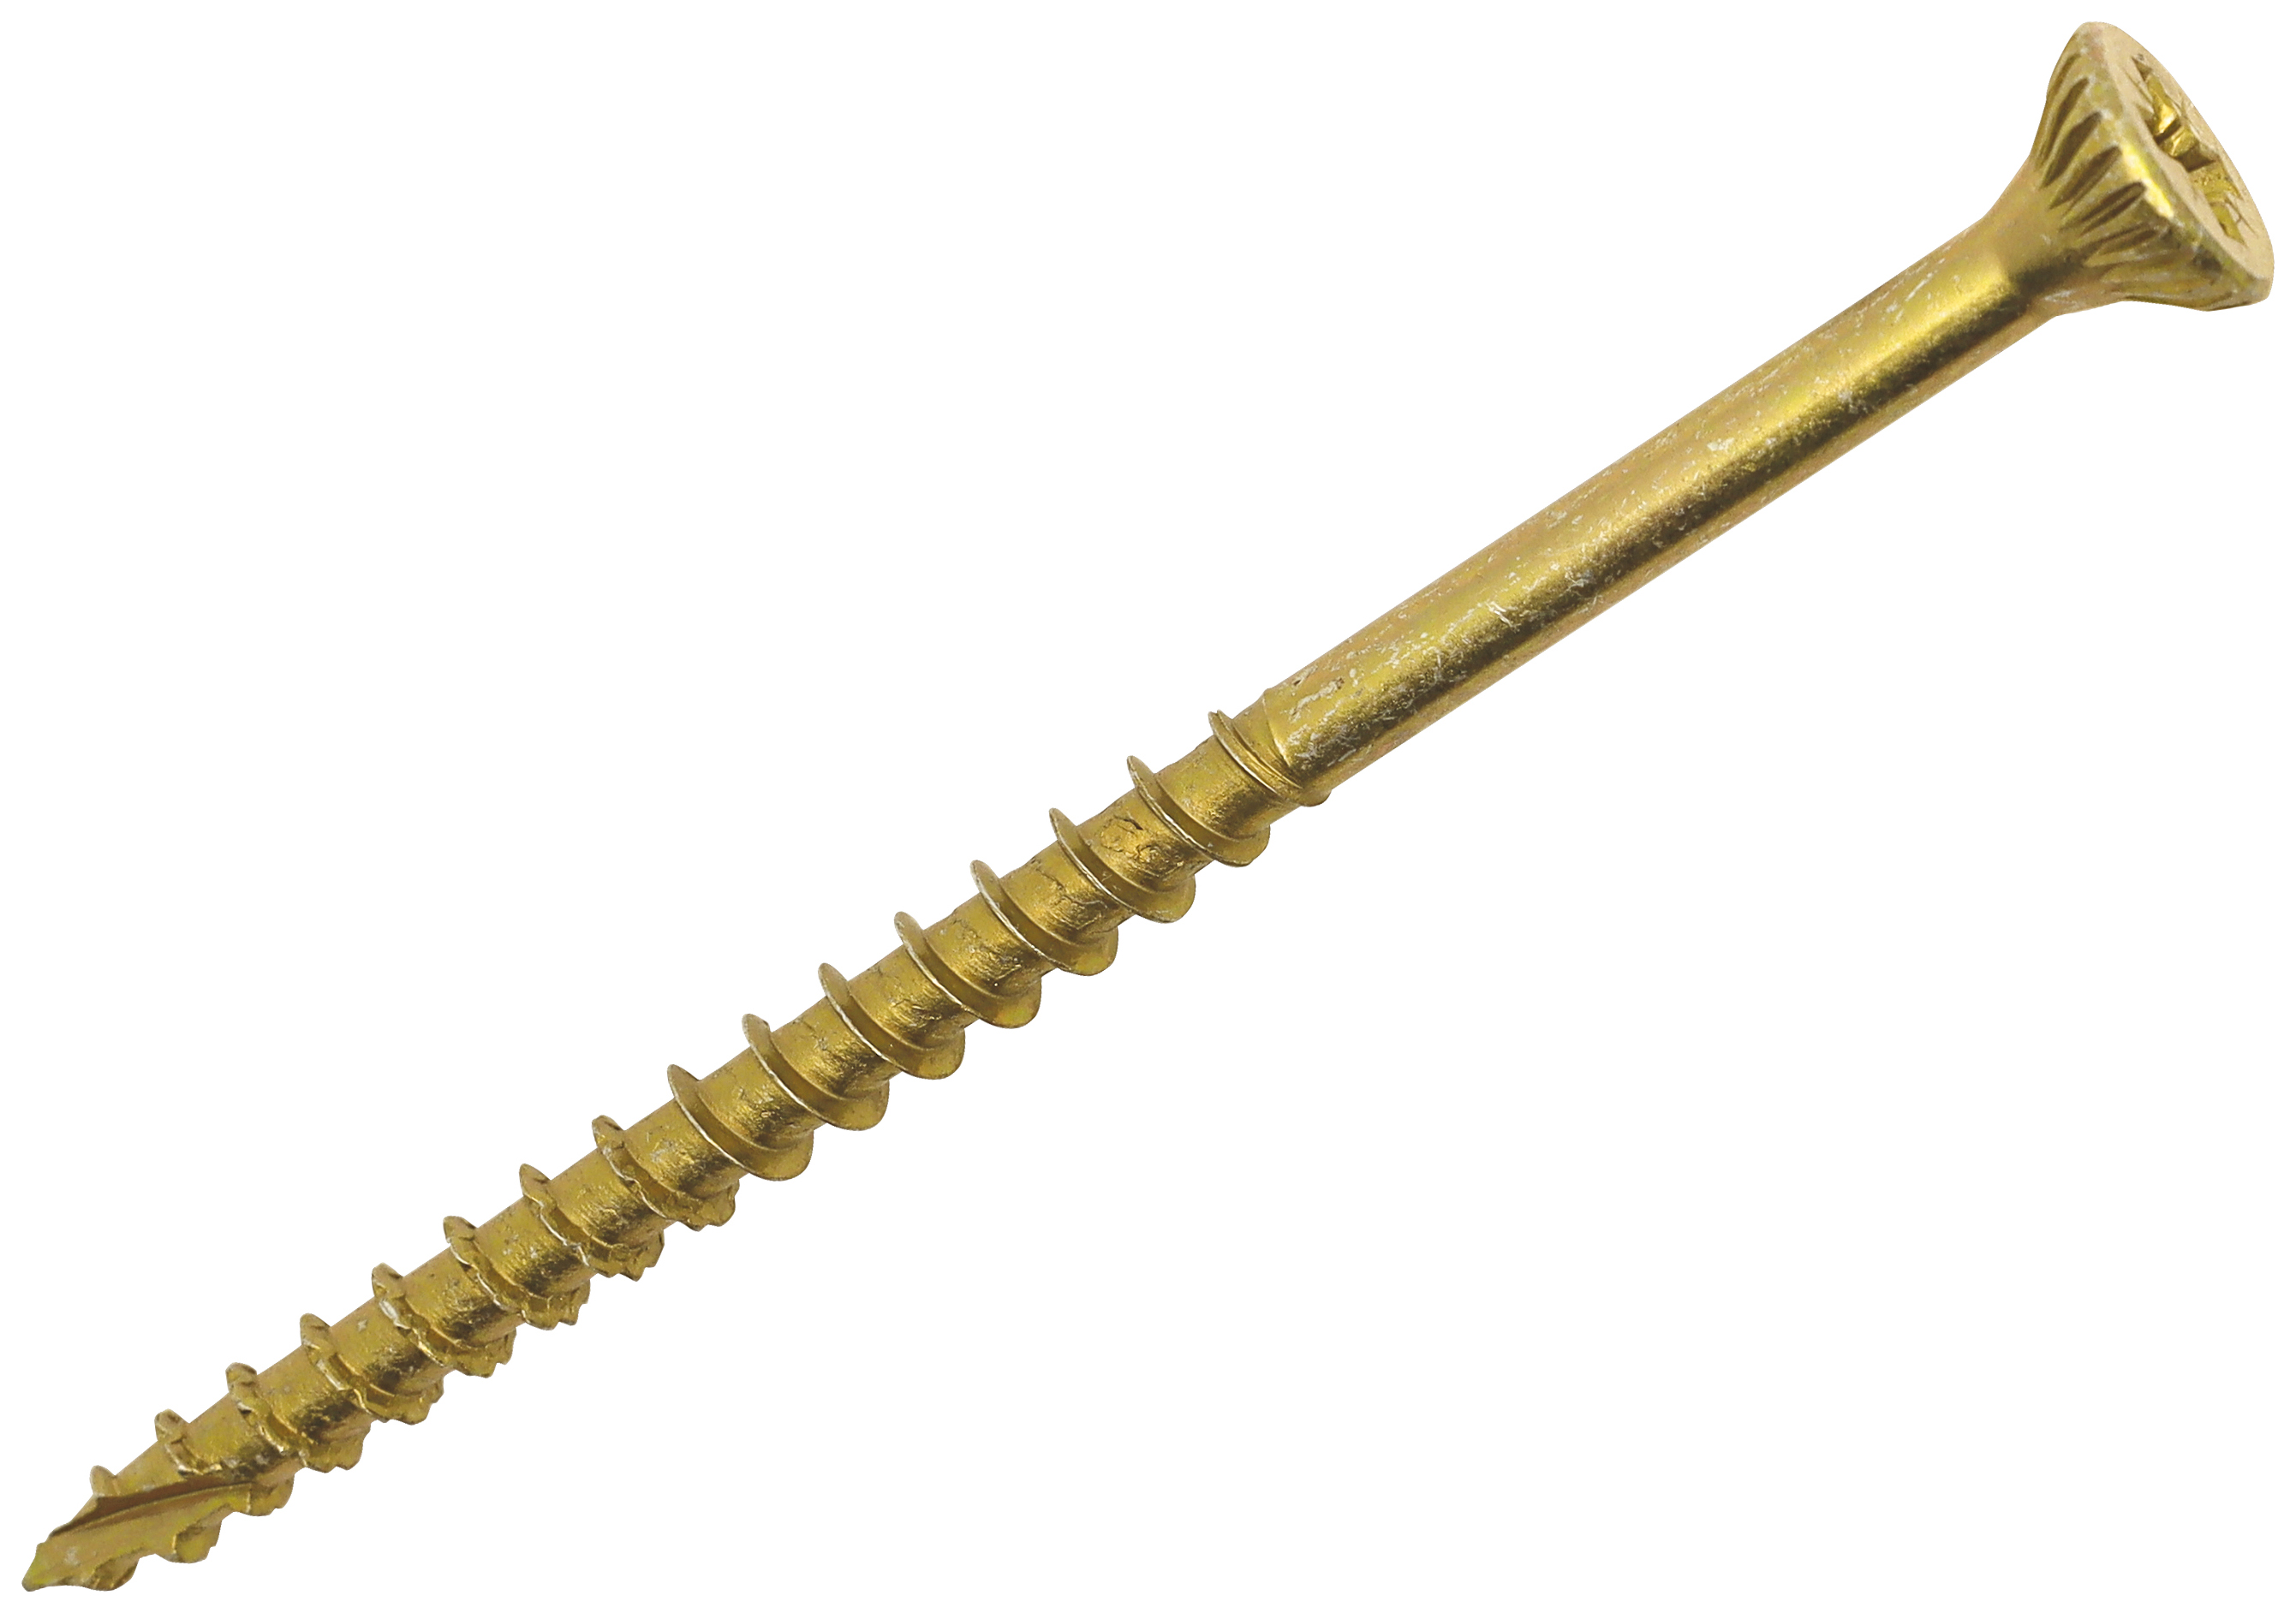 Image of Optimaxx PZ Countersunk Passivated Double Reinforced Wood Screw Maxxtub - 6 x 100mm - Pack of 200